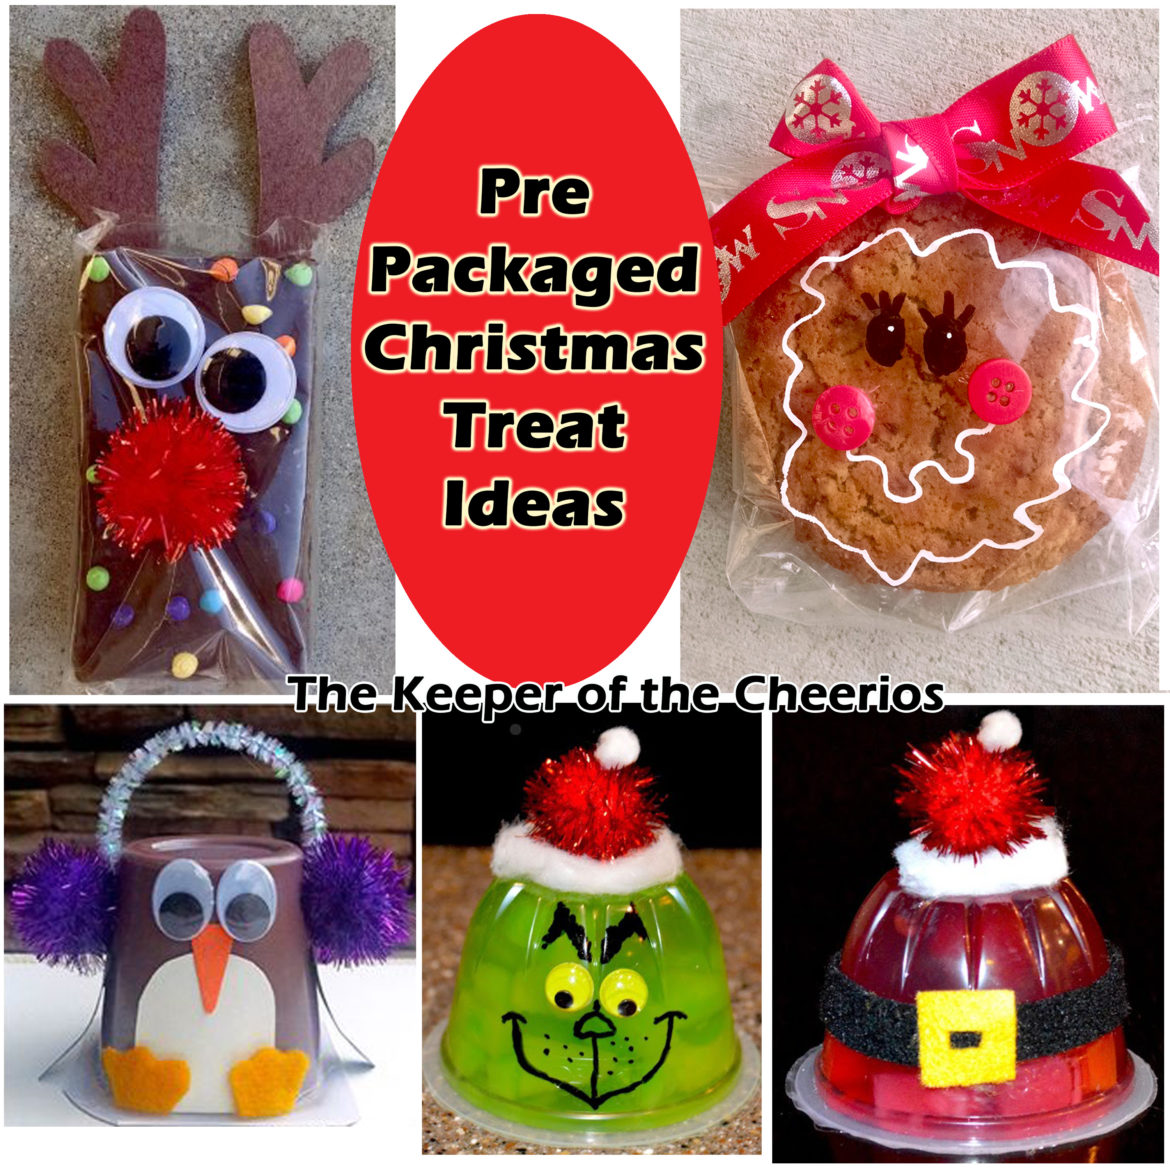 pre-packaged-christmas-treat-ideas